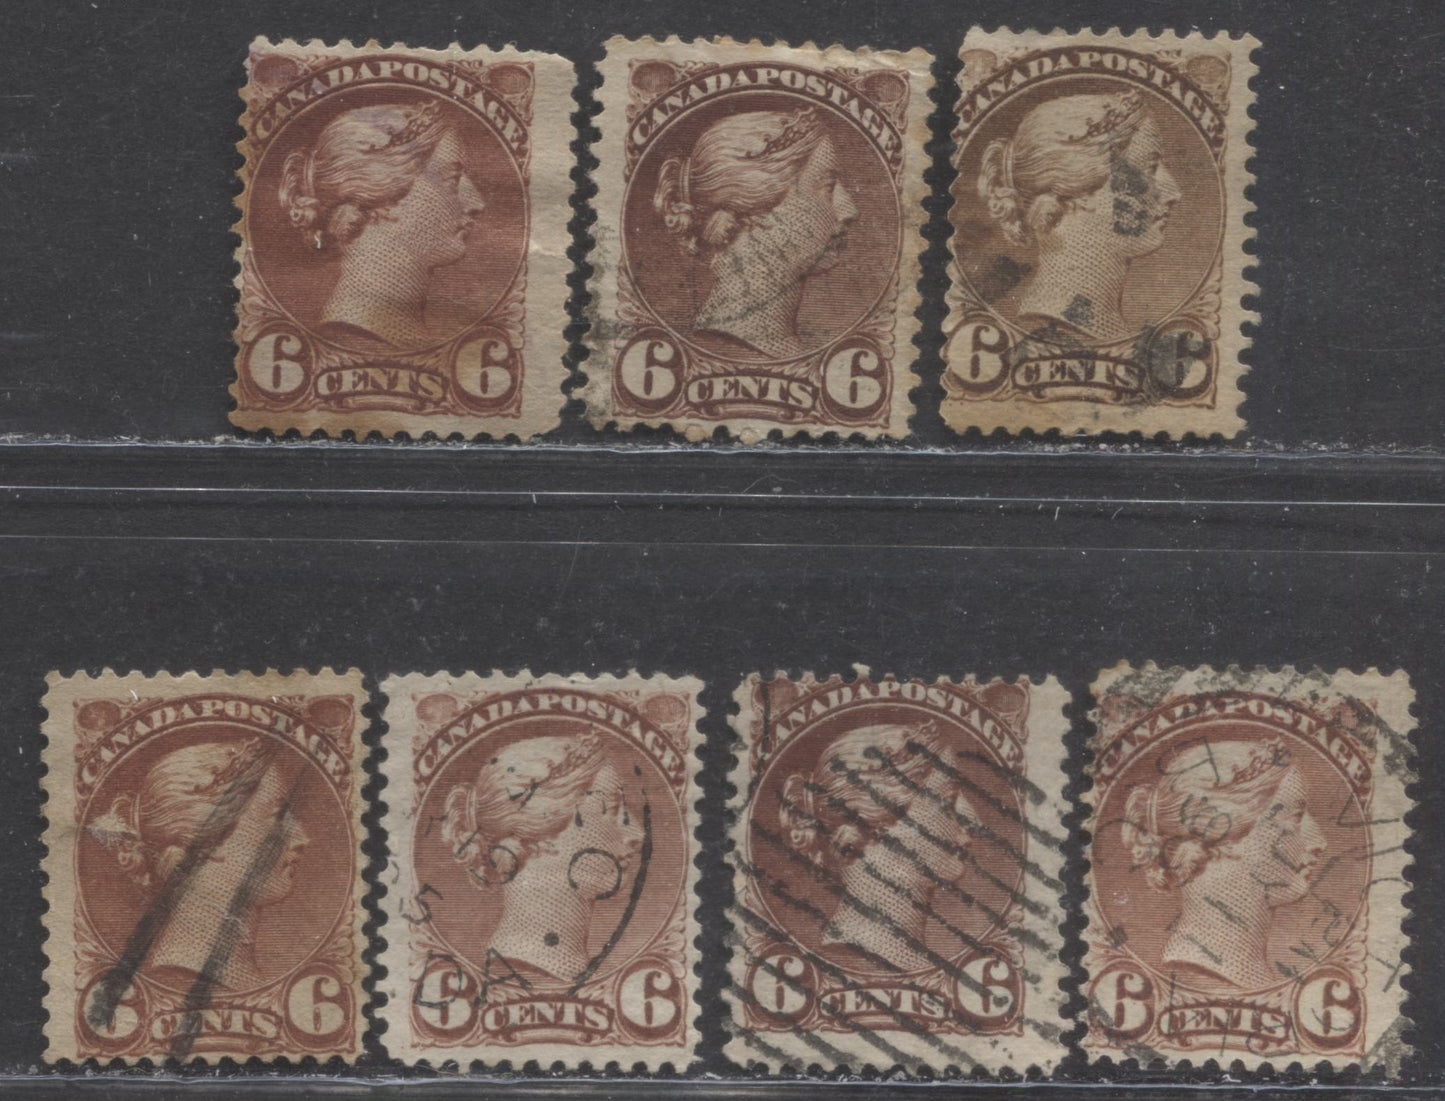 Lot 197 Canada #43, 43a, 43i 6c Red Brown, Chestnut & Chocolate Queen Victoria, 1870-1897 Small Queen Issue, 6 VG/Fine Used Example Of The 2nd Ottawa Printings On Different Papers & Perfs